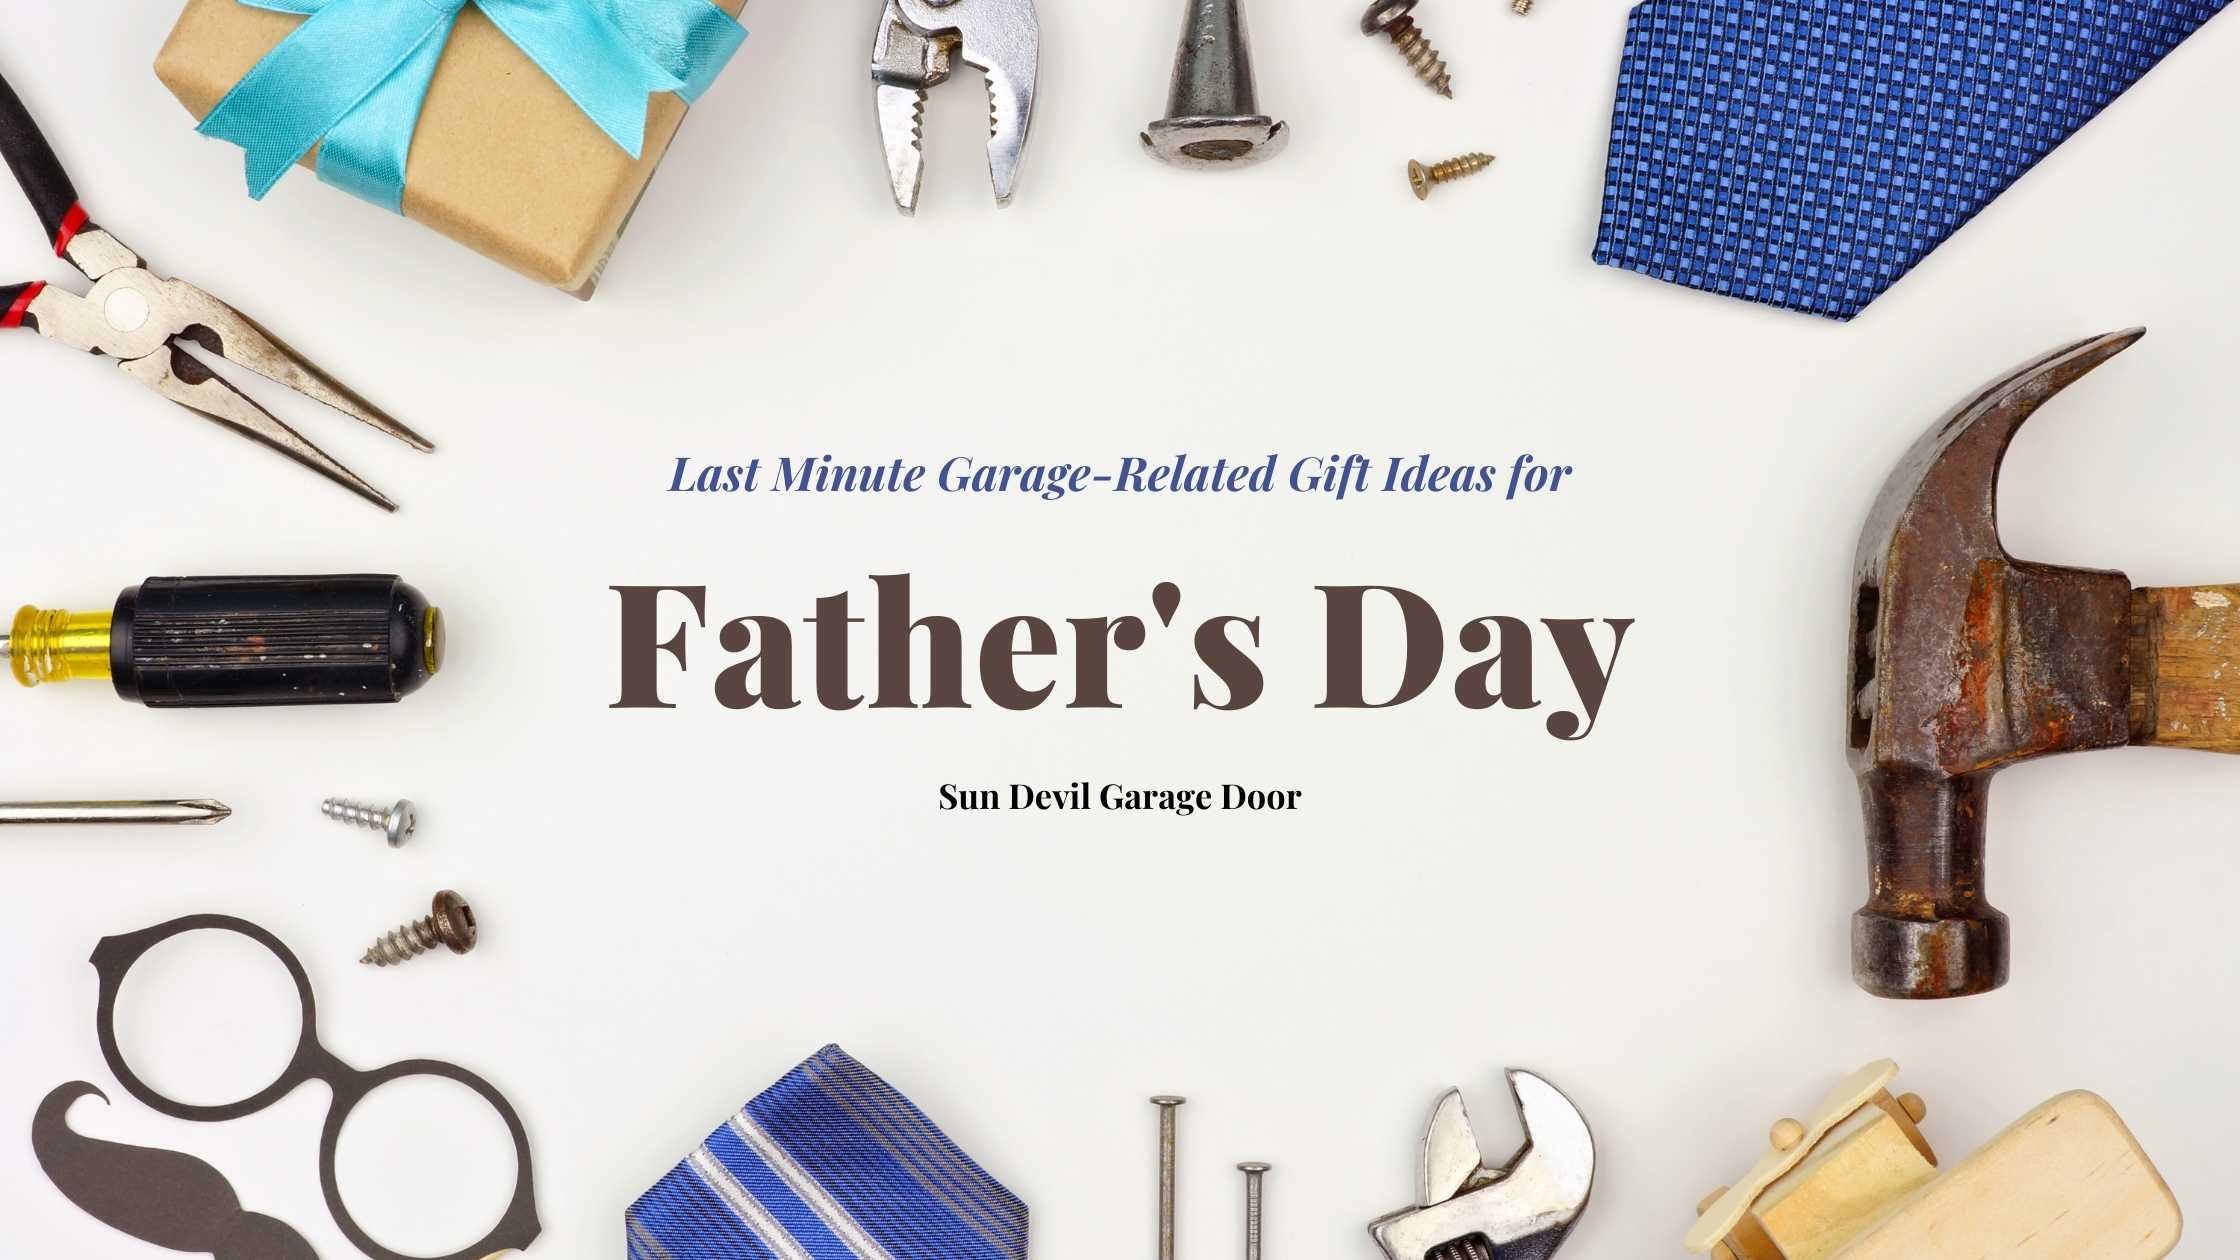 Last Minute Garage Related Gift Ideas for Father's Day   Sun Devil ...